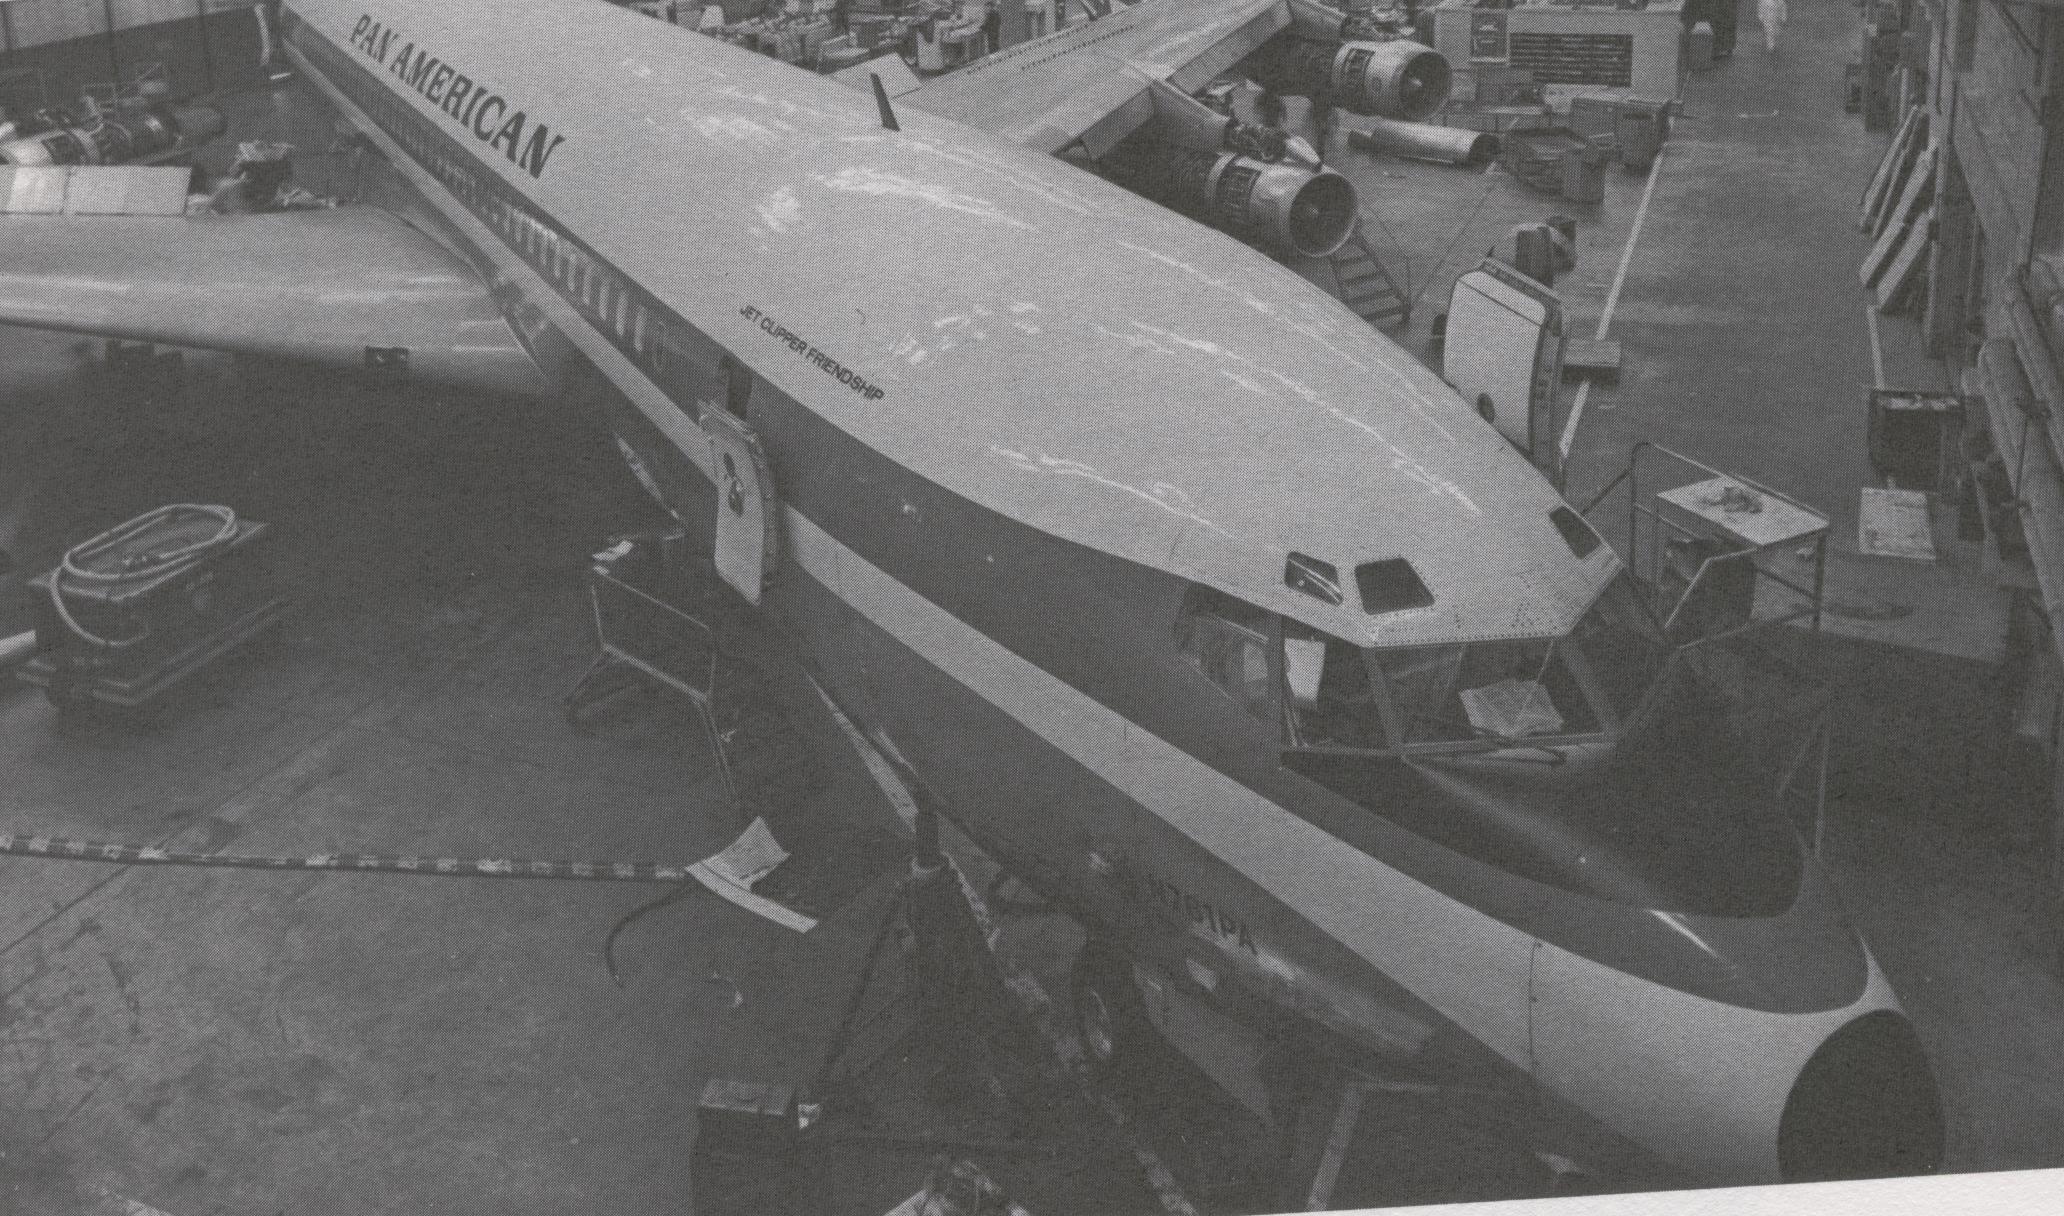 Pan Am Boeing 707 tail number N761PA Clipper Friendship in the hanger for overhaul.